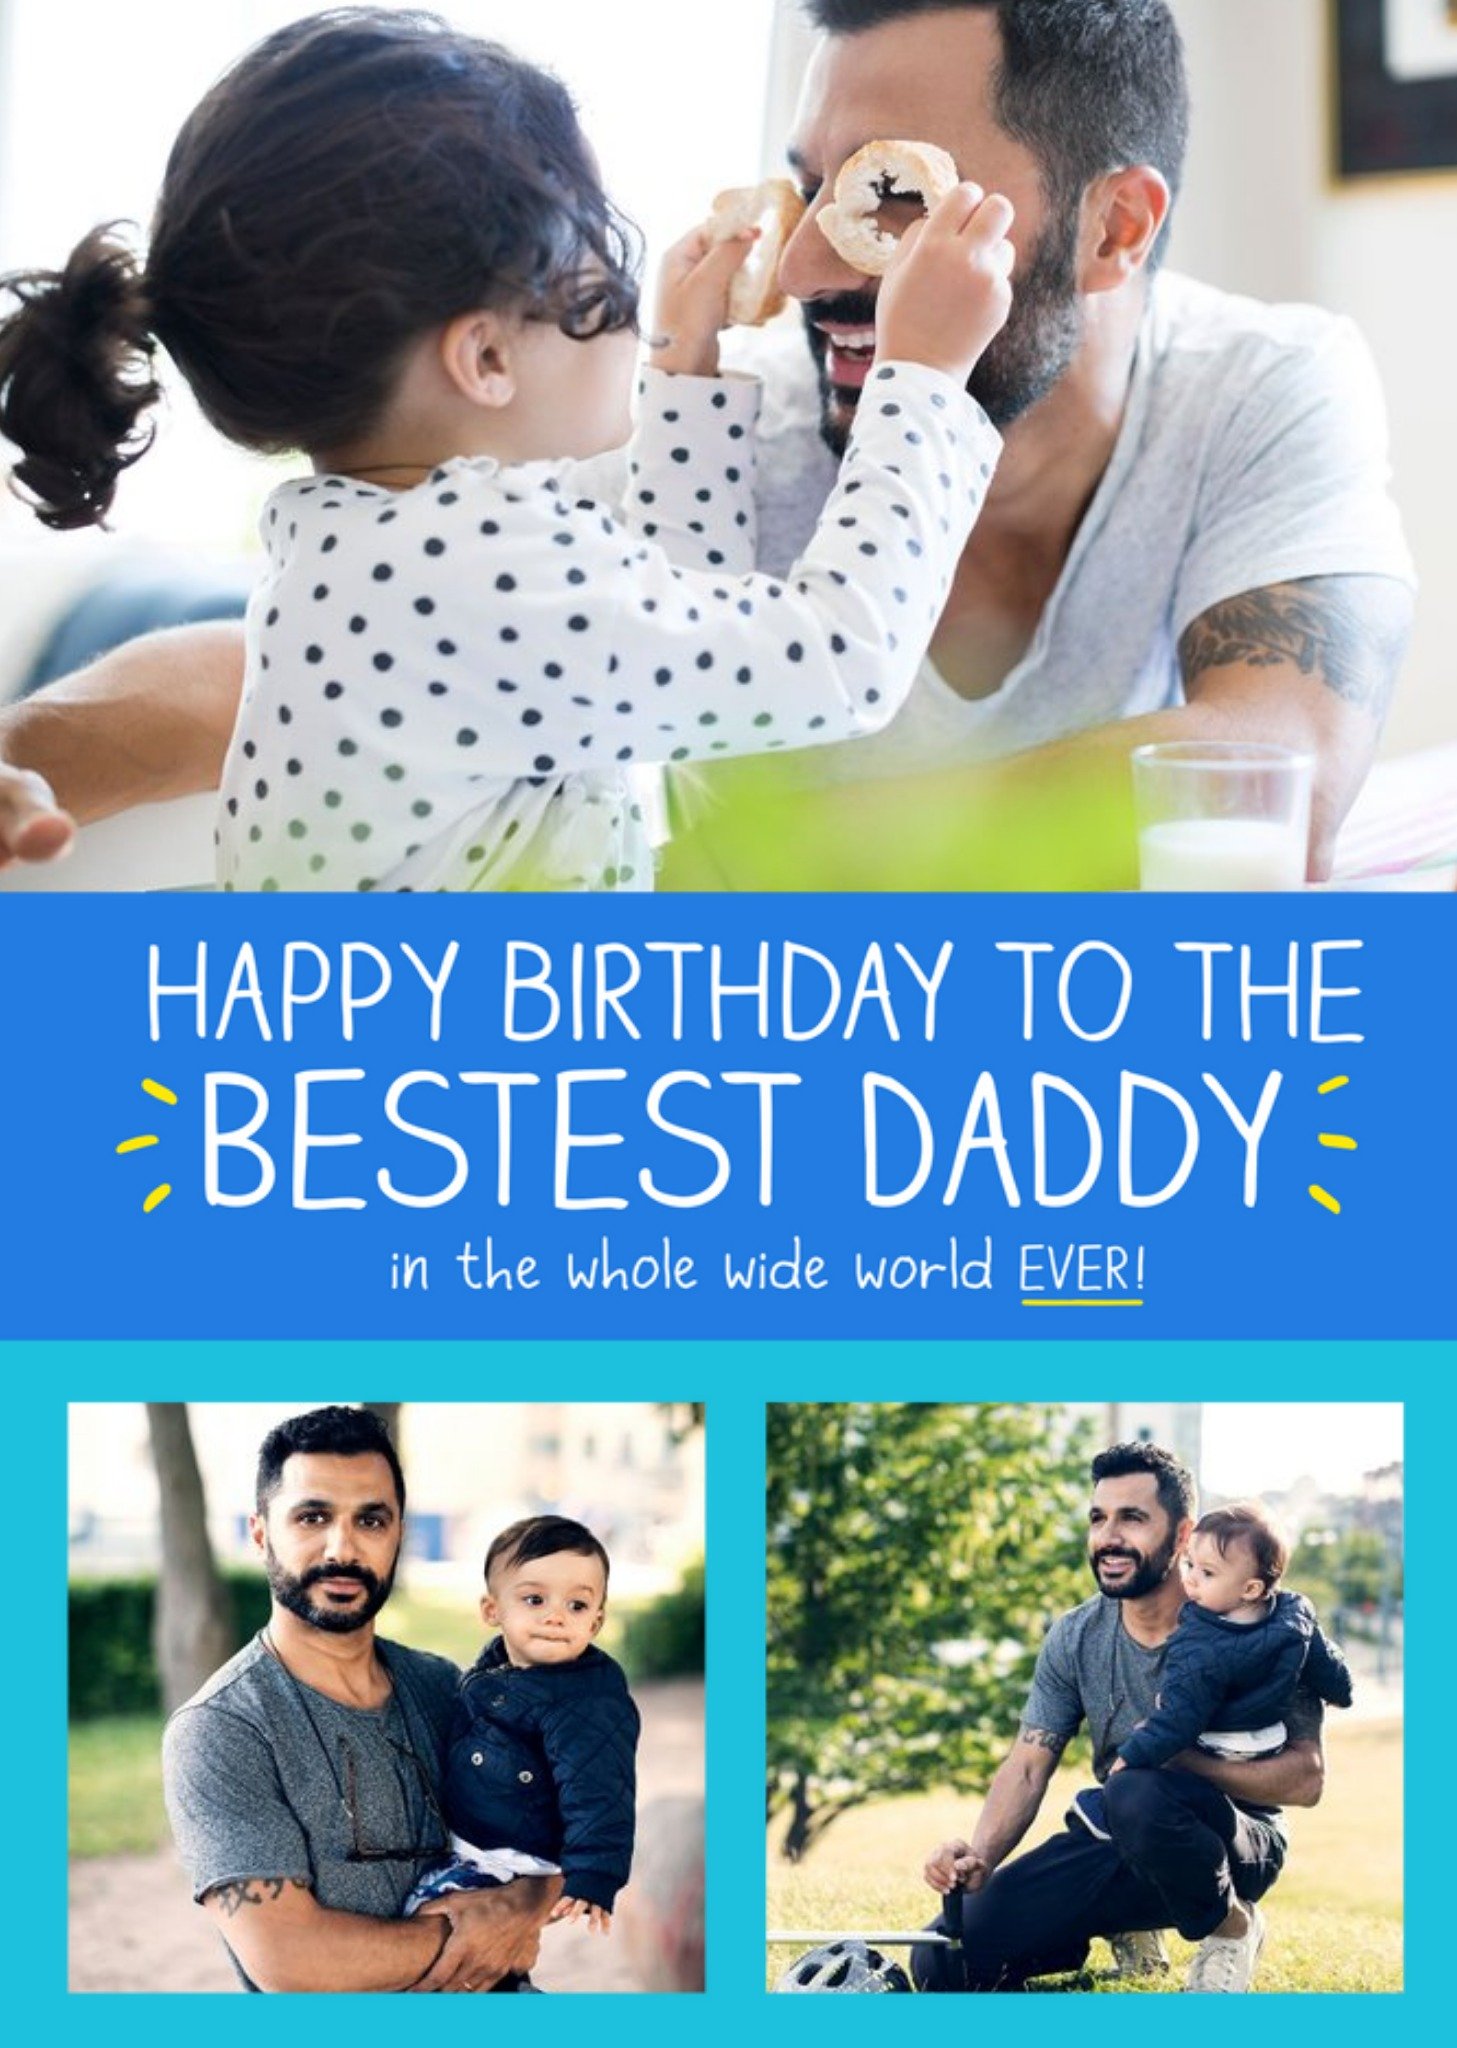 Moonpig Happy Birthday To The Bestest Daddy In The Whole Wide World Ever - Photo Upload Postcard